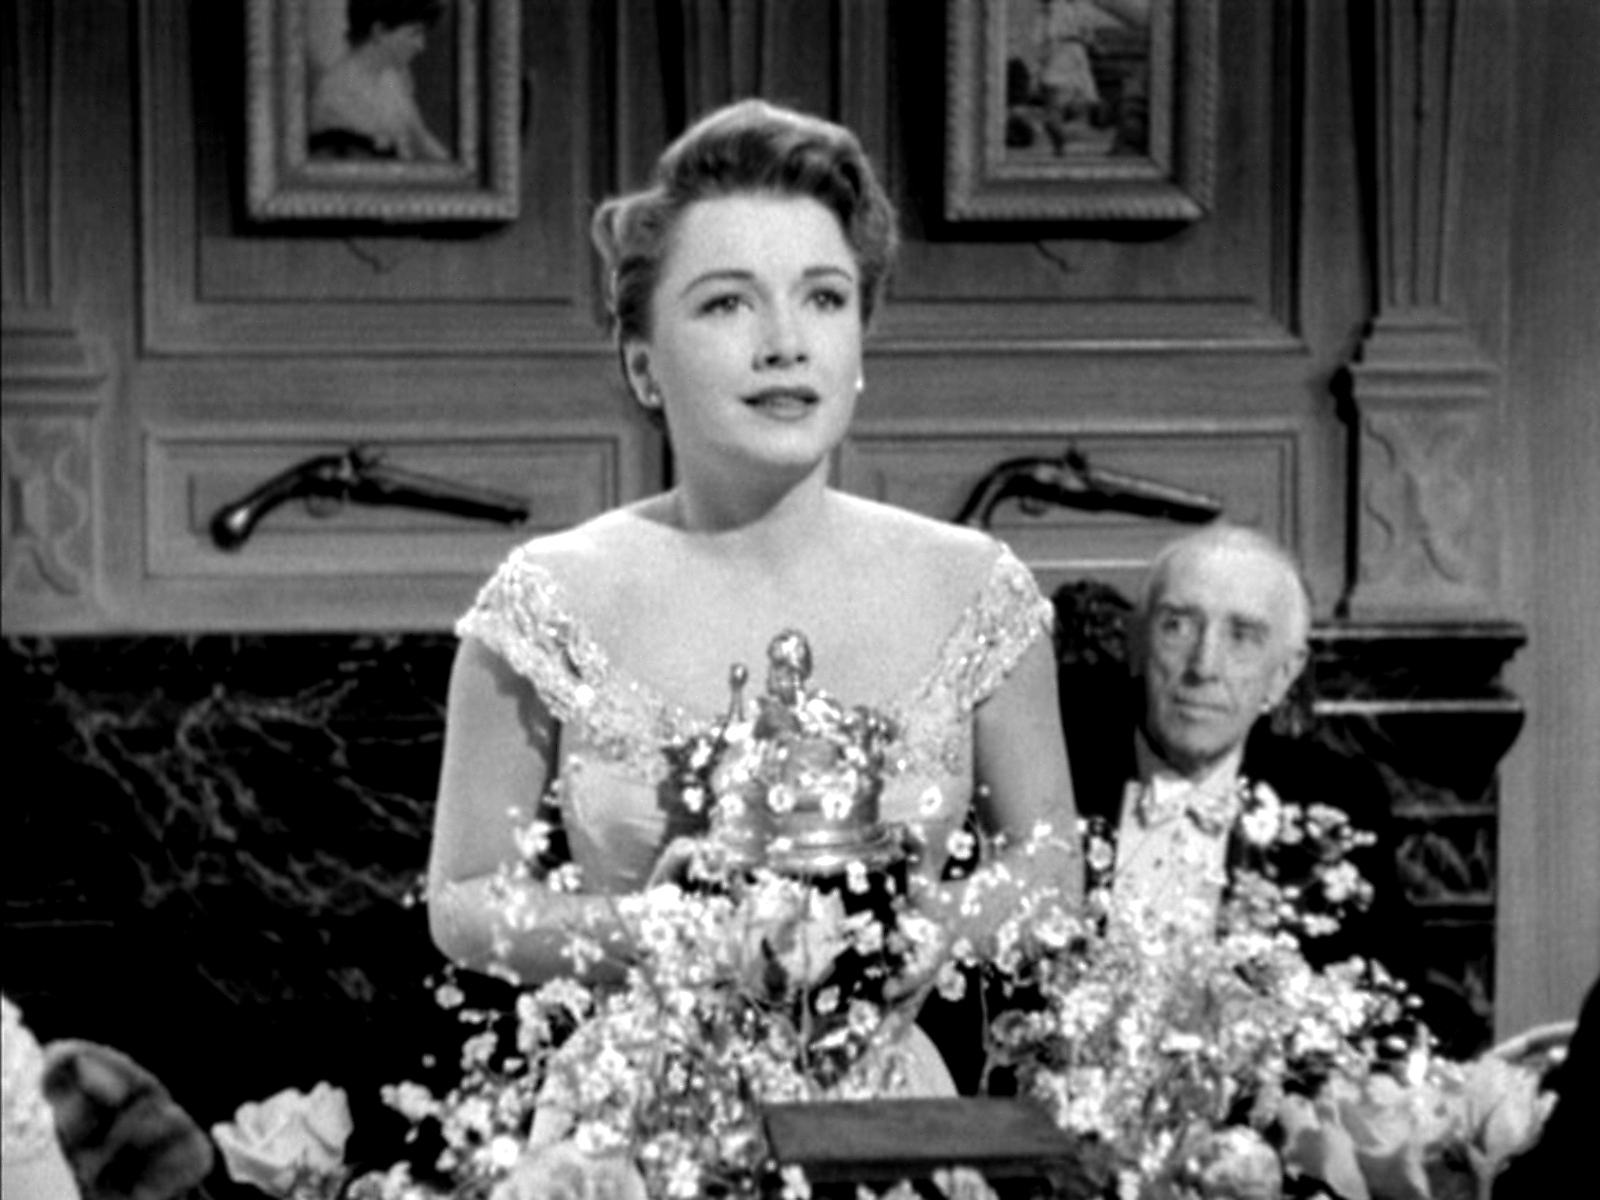 1950: All About Eve. Operation: Oscar